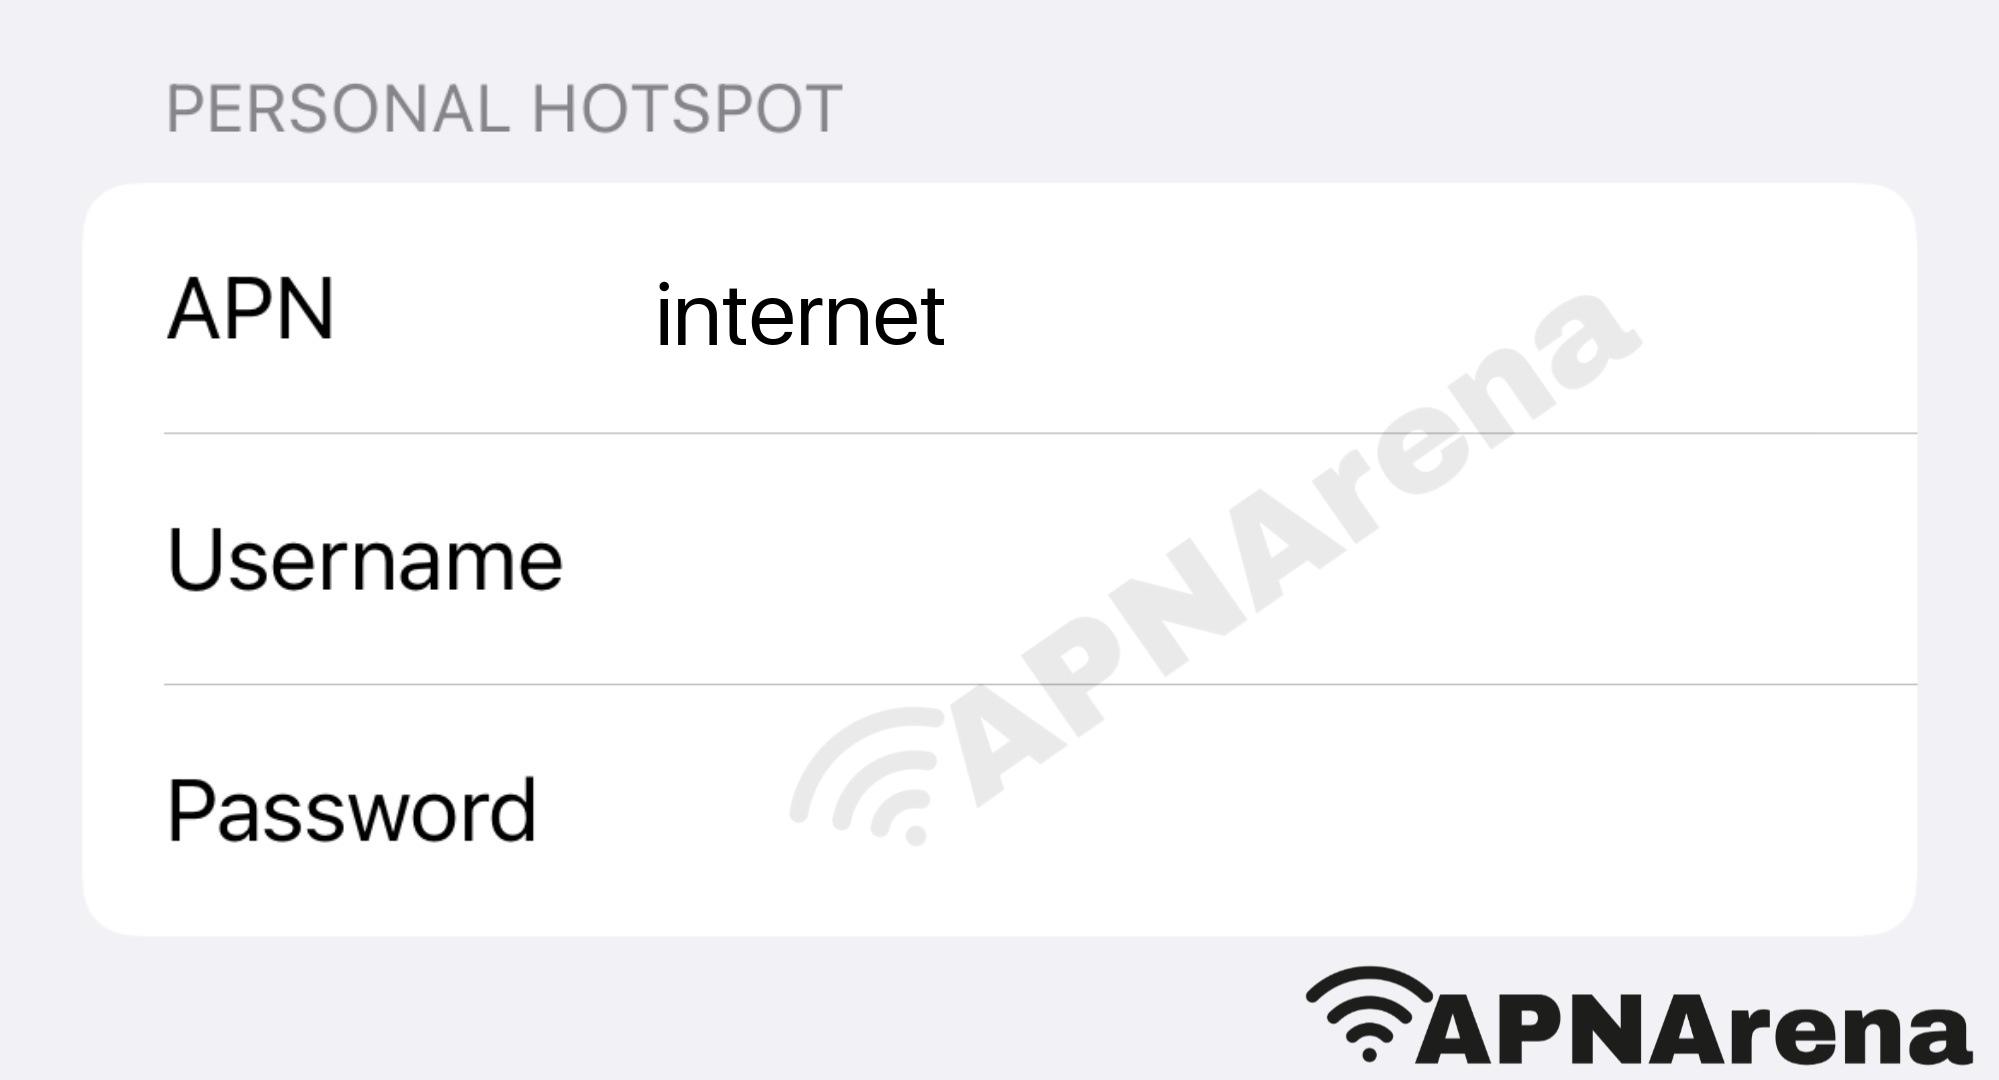 Superdrug Mobile Personal Hotspot Settings for iPhone